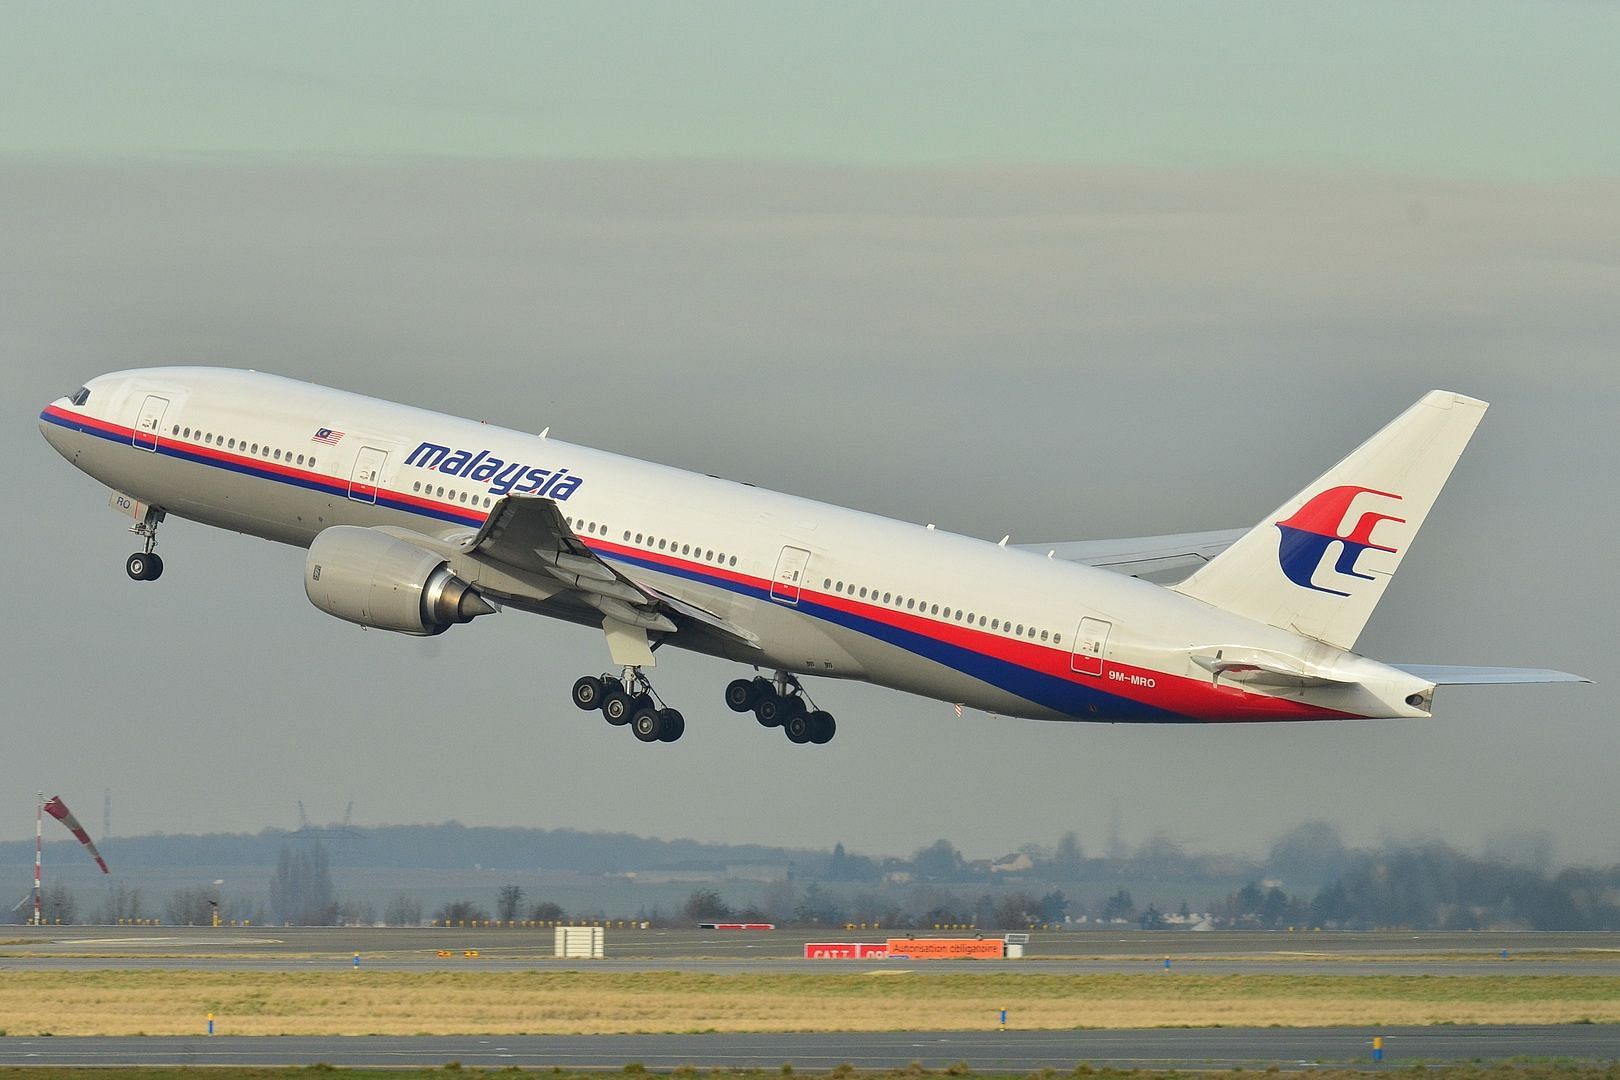 Why did the experts suggest that MH370 was crashed deliberately? Details explored. (Image via Malaysian Airlines)